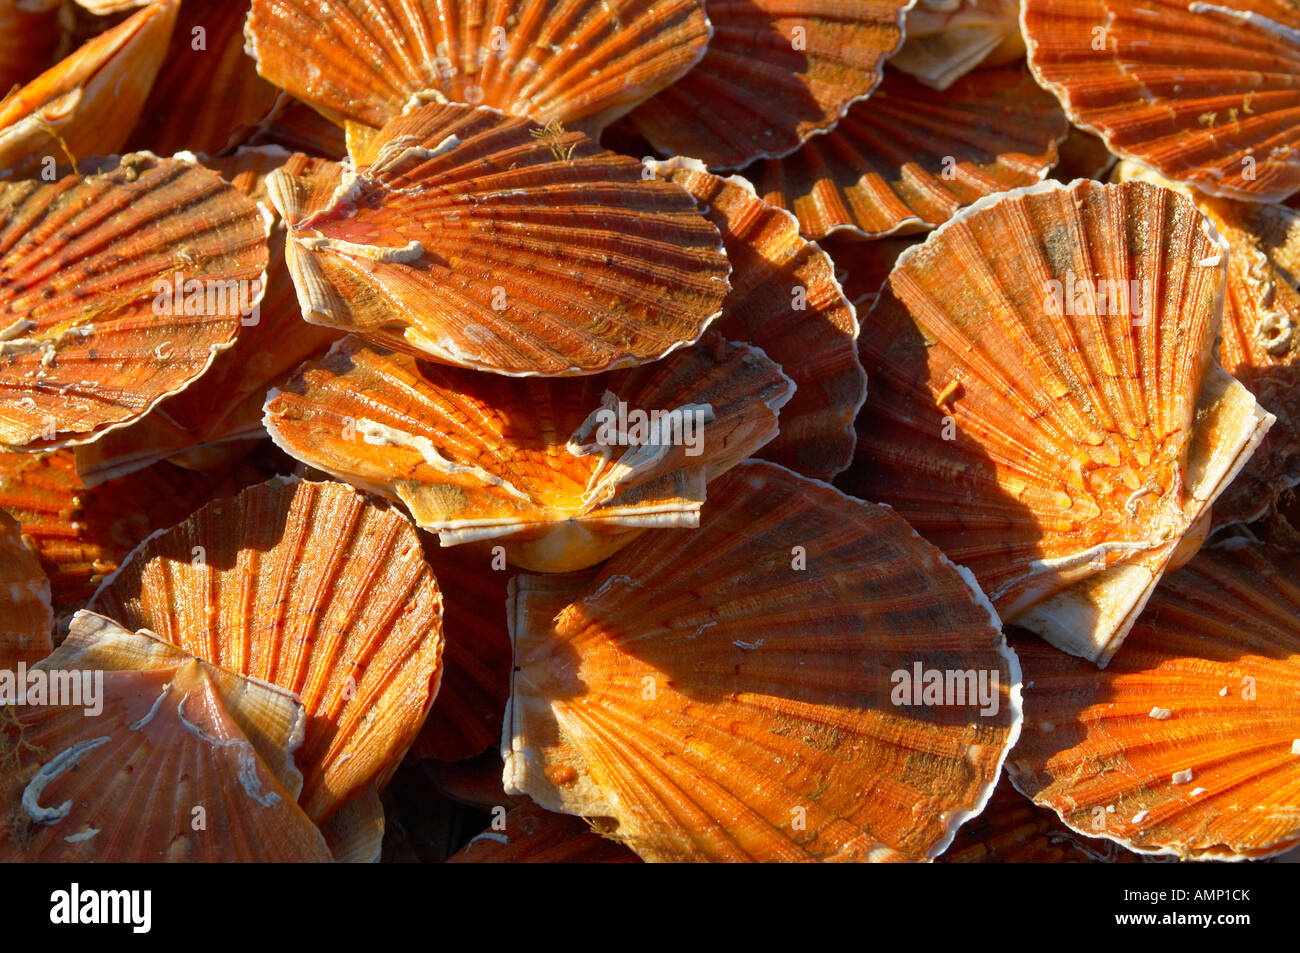 Scallops being landed off a fishing boat Stock Photo